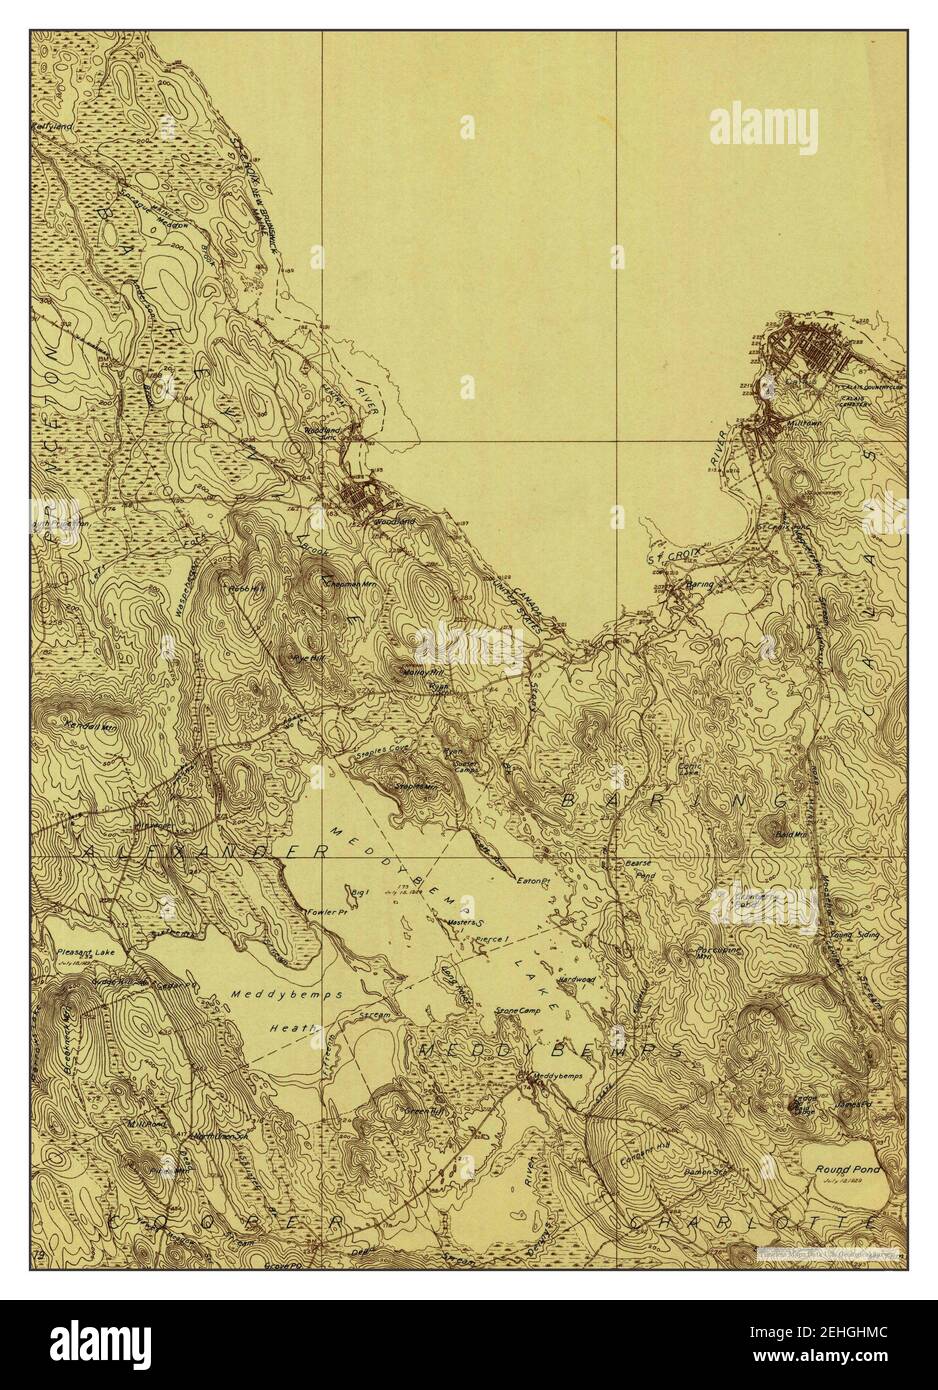 Calais, Maine, map 1929, 1:48000, United States of America by Timeless Maps, data U.S. Geological Survey Stock Photo